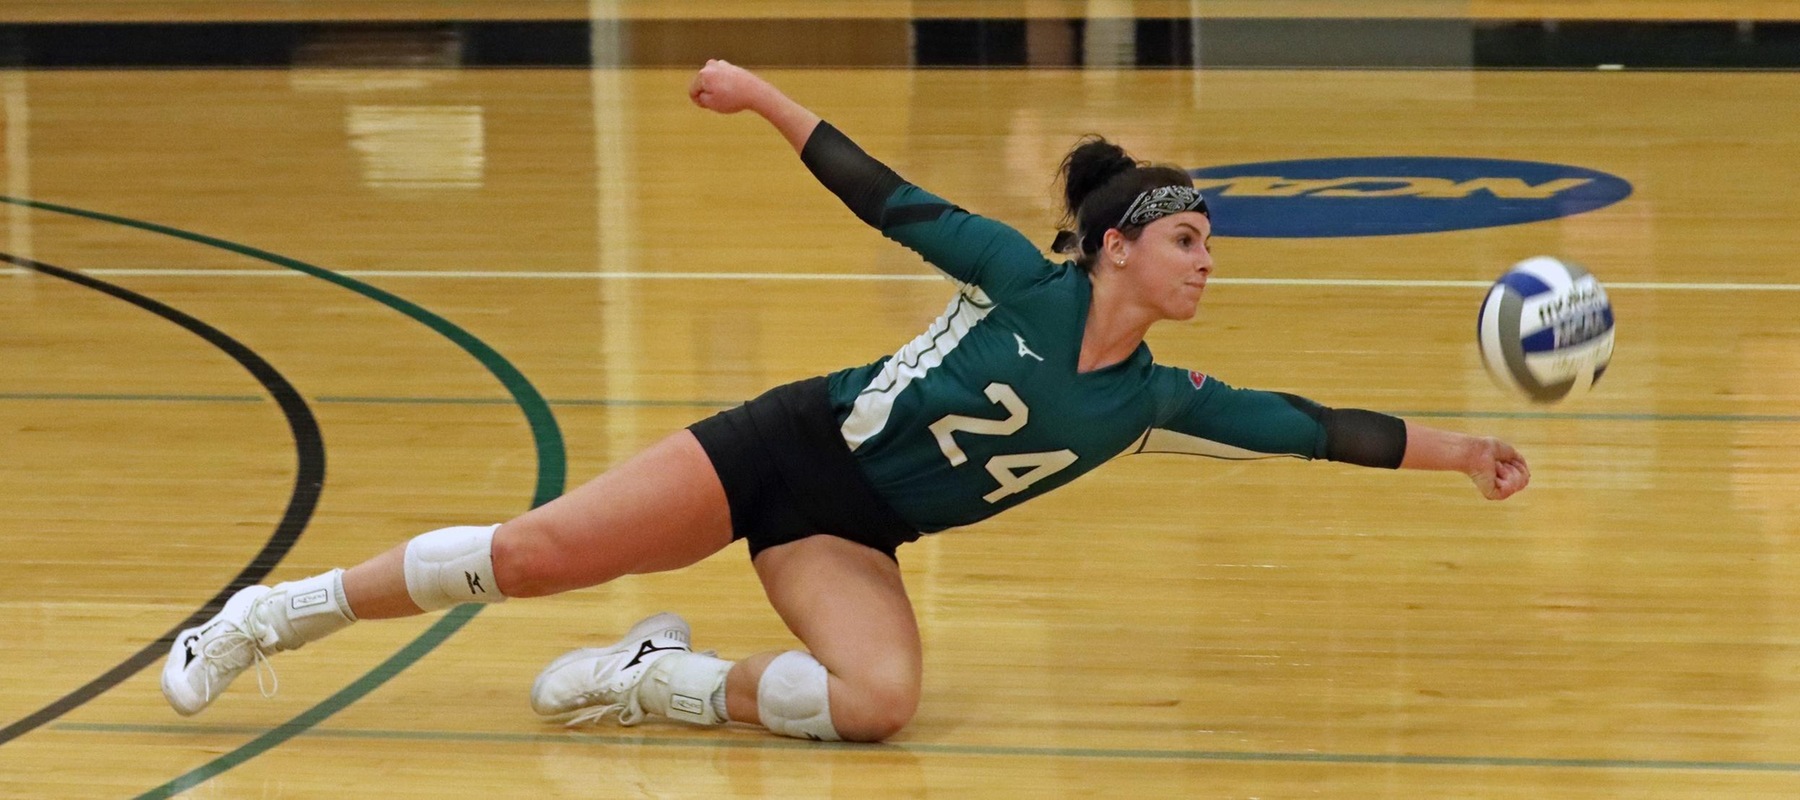 Photo of Elly Collins picking up a dig and sending it over the net for a kill all in one motion against West Chester on Wednesday. Copyright 2023; Wilmington University. All rights reserved. Photo by Dan Lauletta. September 27, 2023 vs. West Chester.